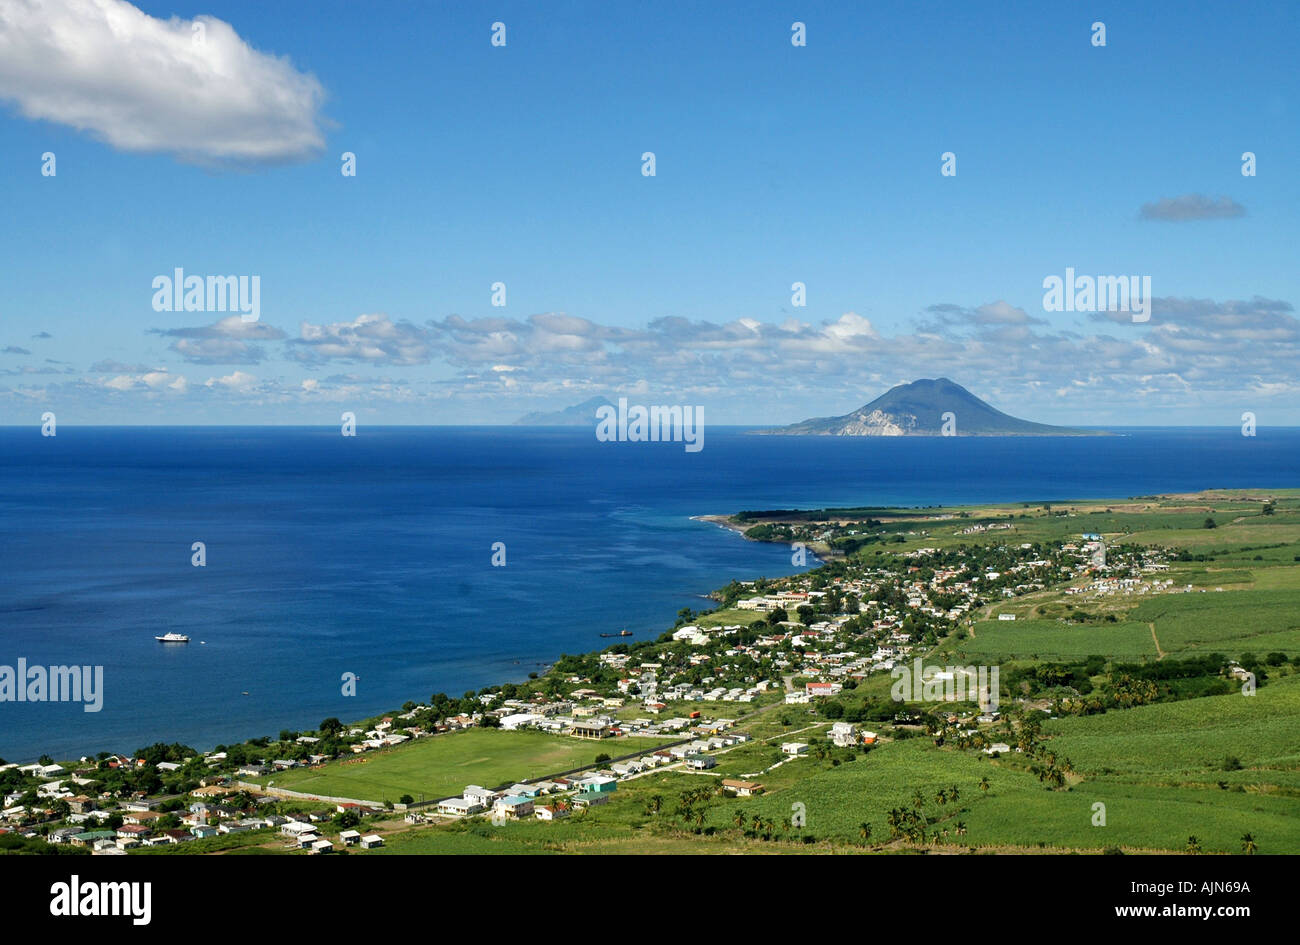 St Kitts  scenic panorama from Brimstone Hill Fortress National Park with St Eustatius and Saba in distance Stock Photo